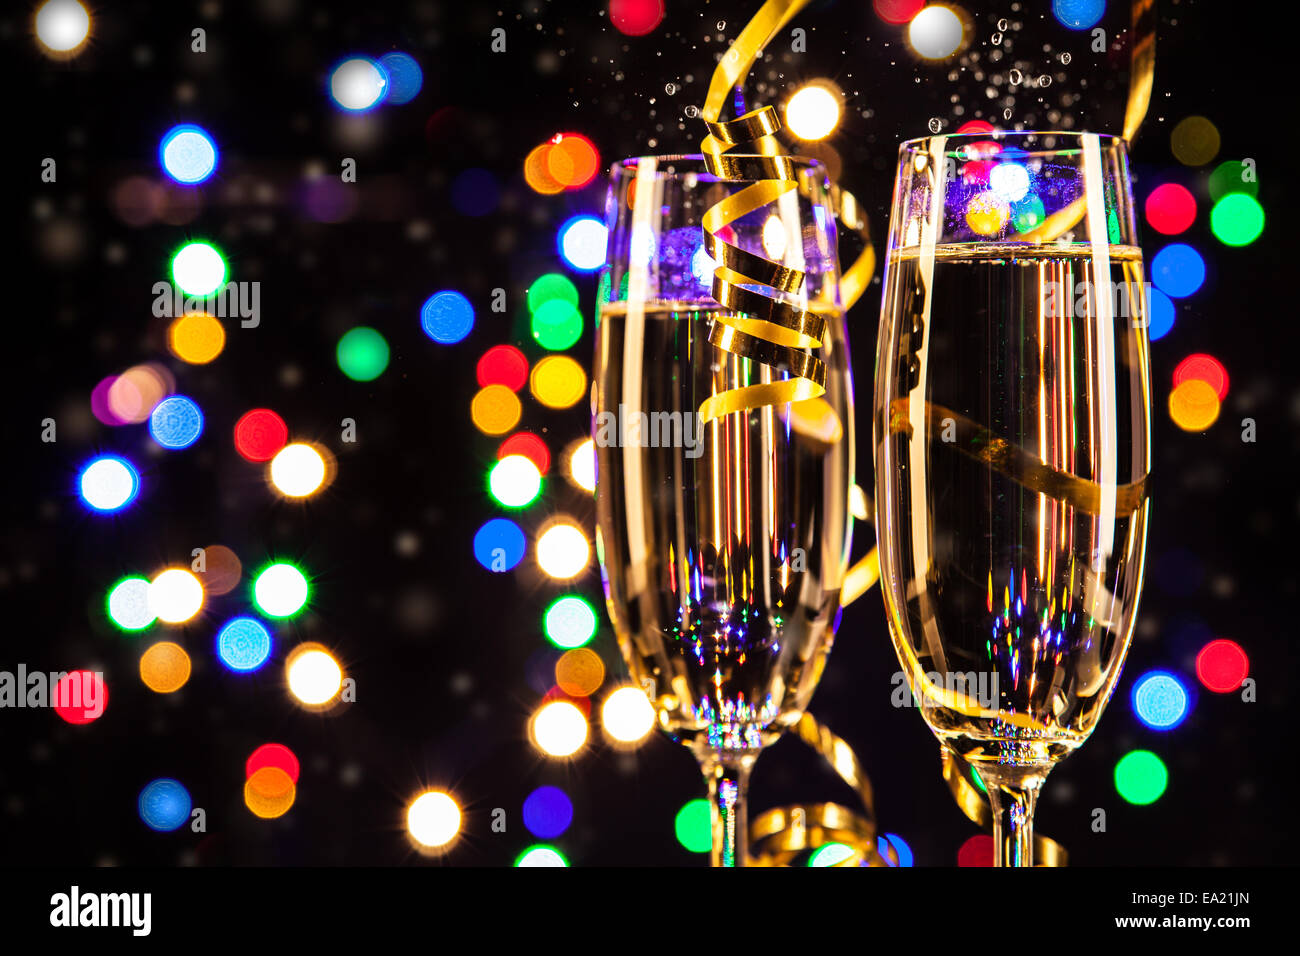 Glasses of champagne on black background with blur colored spot lights. Concept of celebration Stock Photo